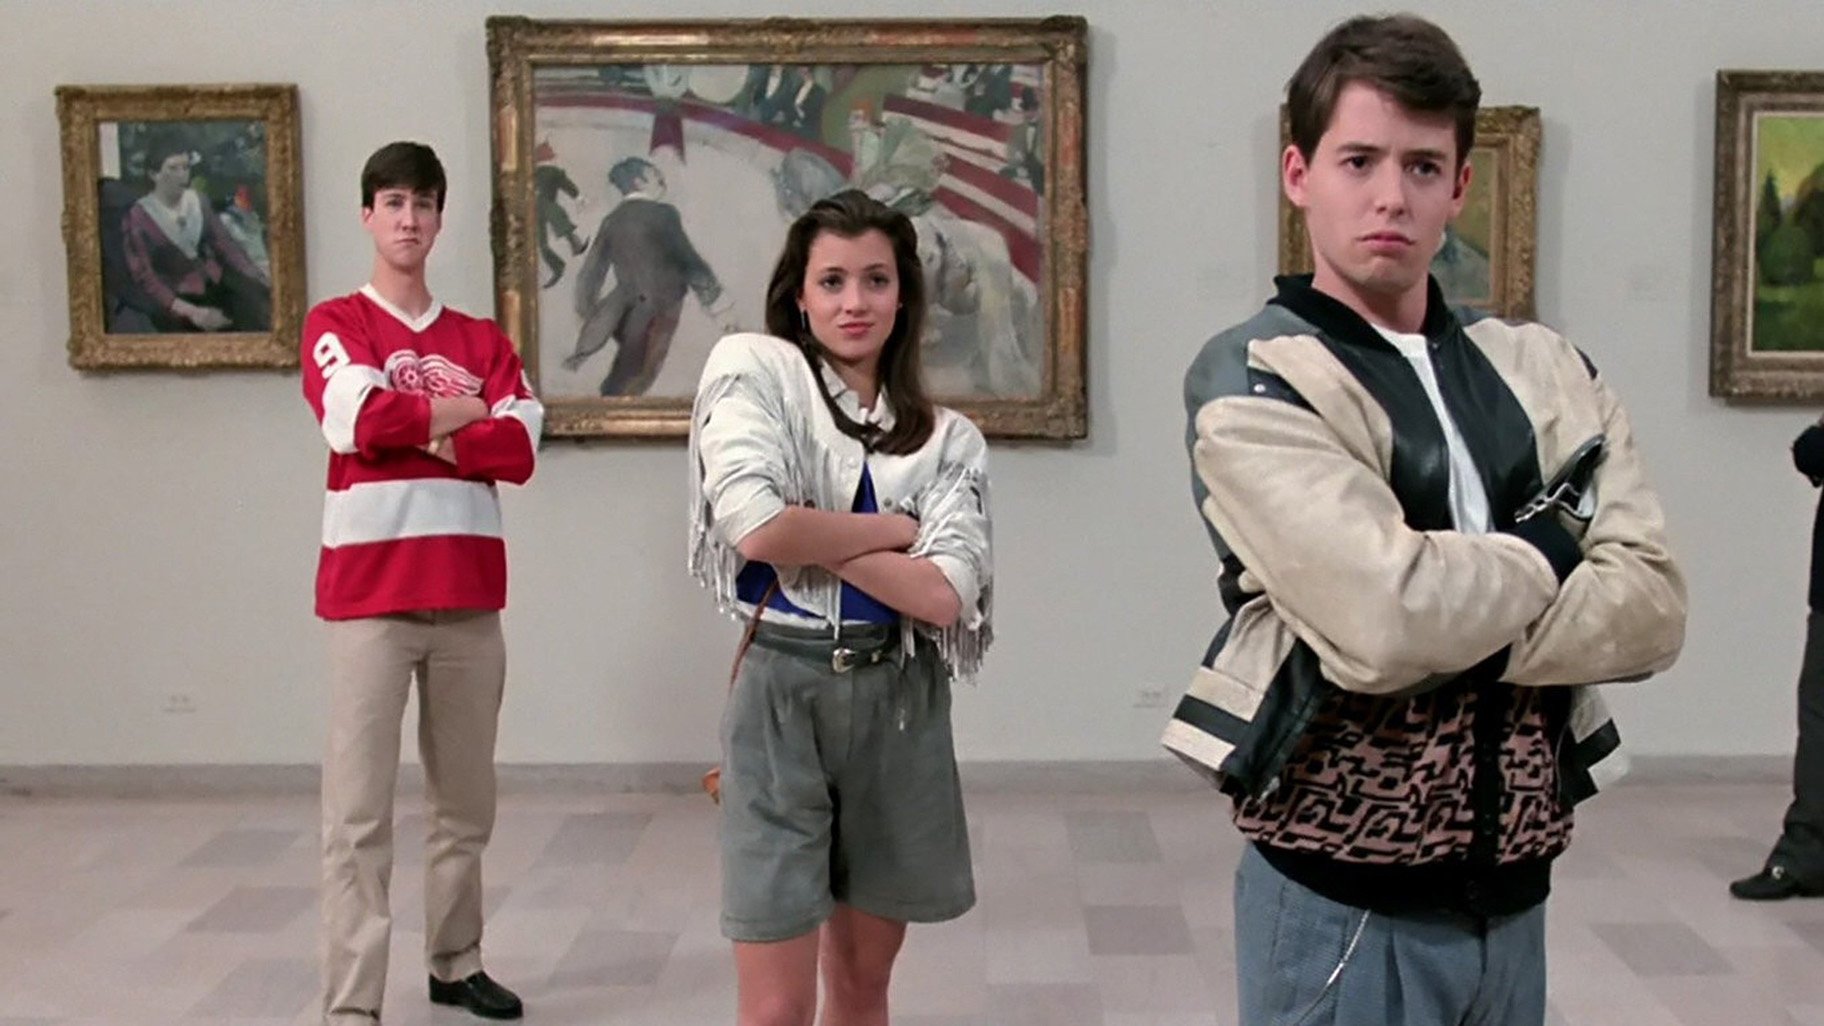 "Ferris Bueller's Day Off" (Paramount Pictures)